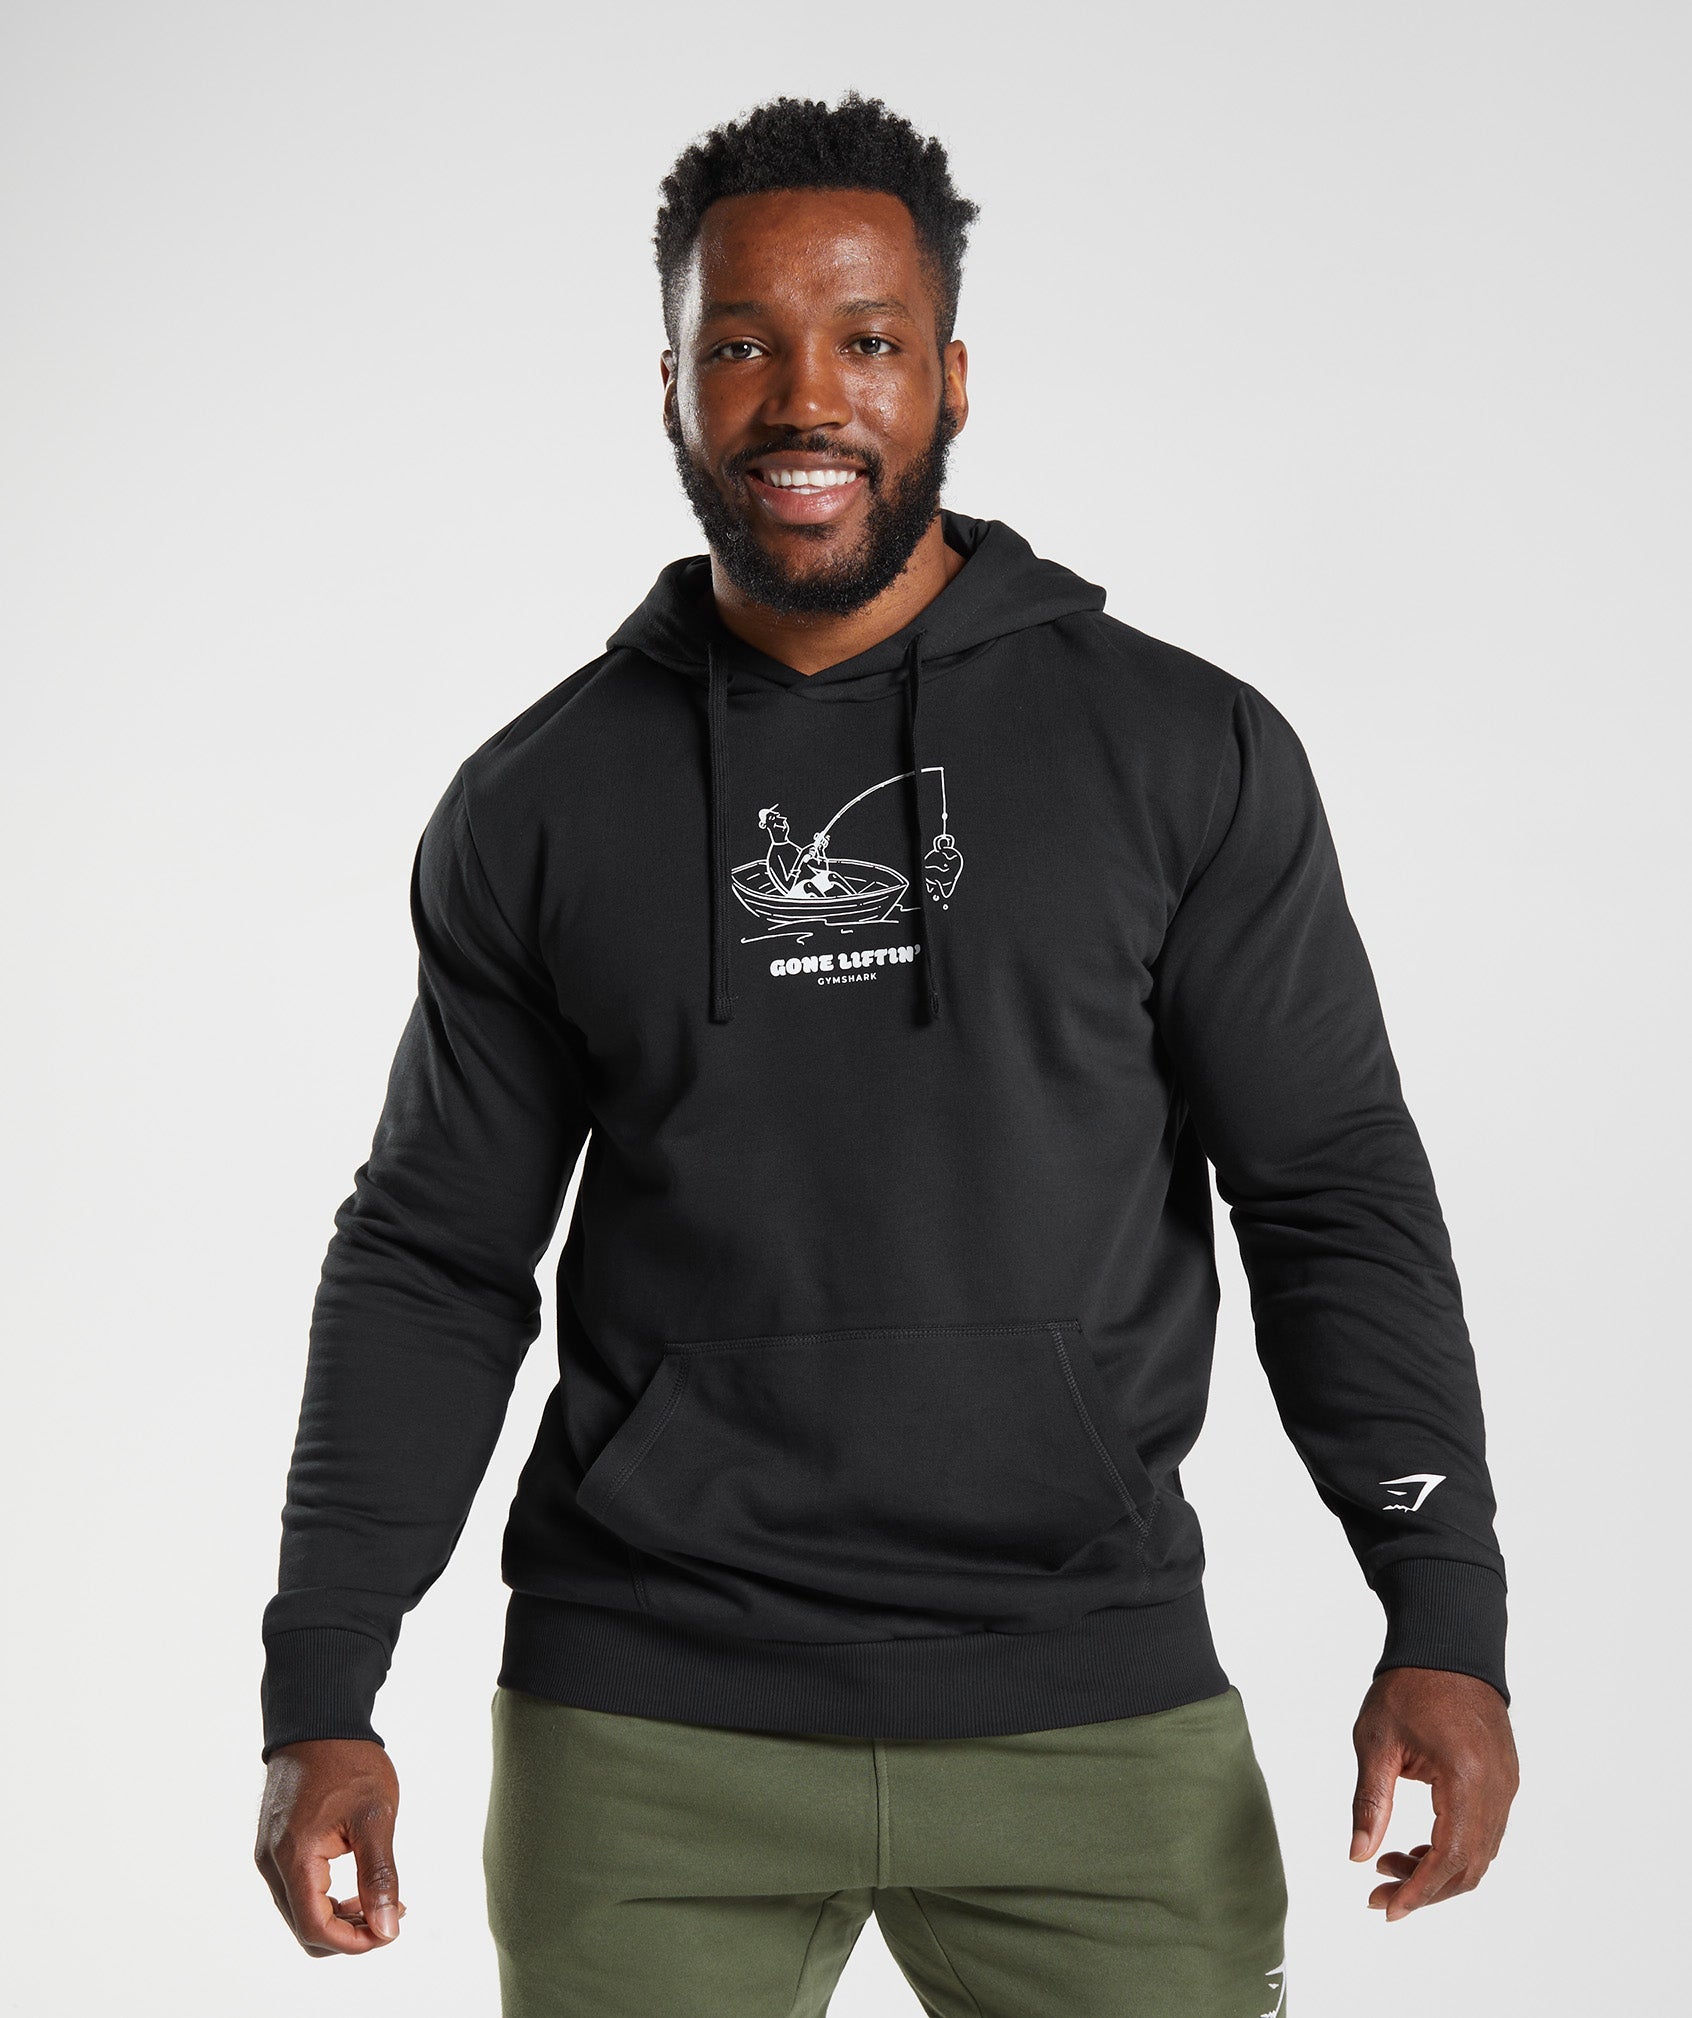 Gone Liftin' Graphic Hoodie in Black